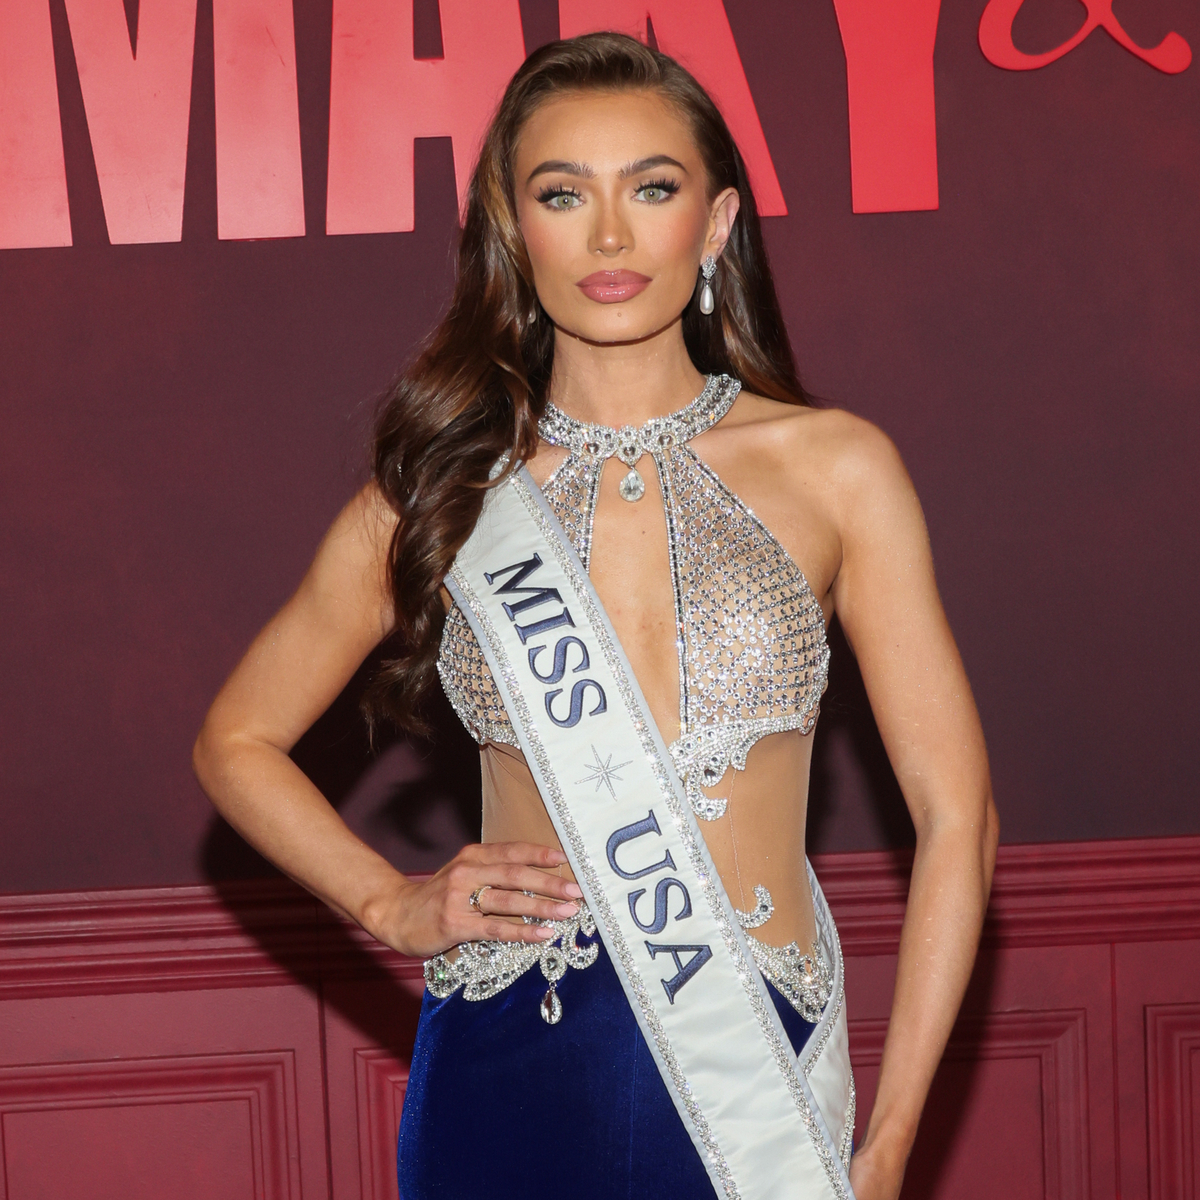 Miss USA Noelia Voigt resigns from her title to focus on mental health